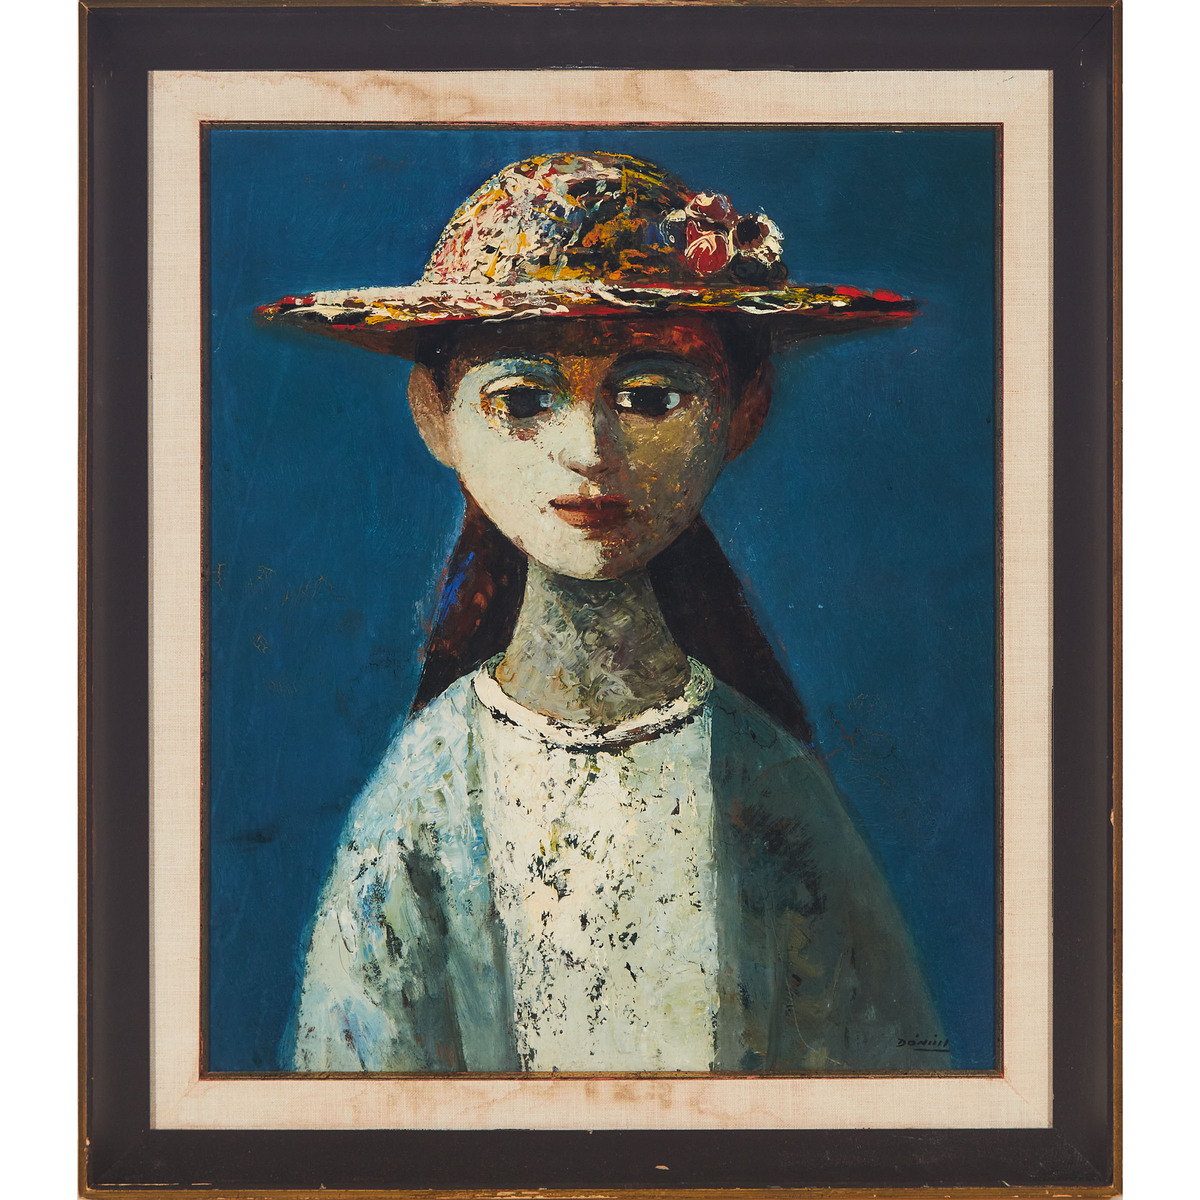 Daniel O'Neill (1920-1974), PORTRAIT OF A GIRL, signed lower right, 21.9 x 18.3 in — 55.6 x 46.5 cm - Image 2 of 5